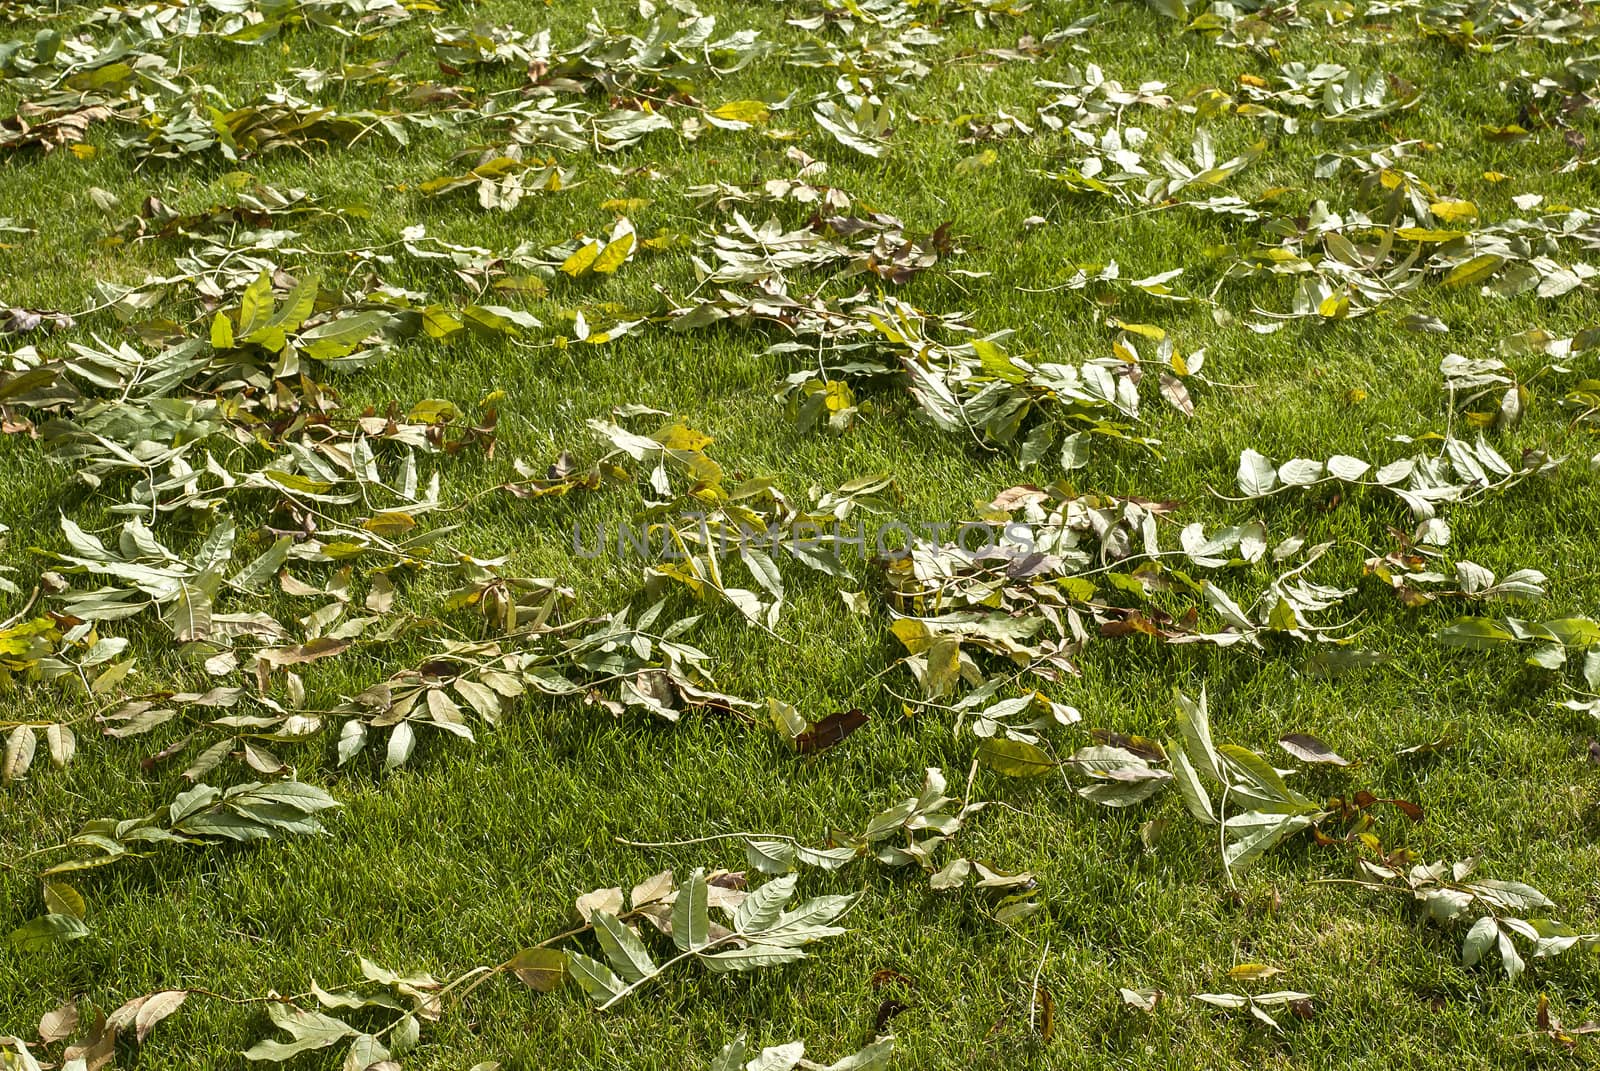 Green lawn fallen autumn leaves as background